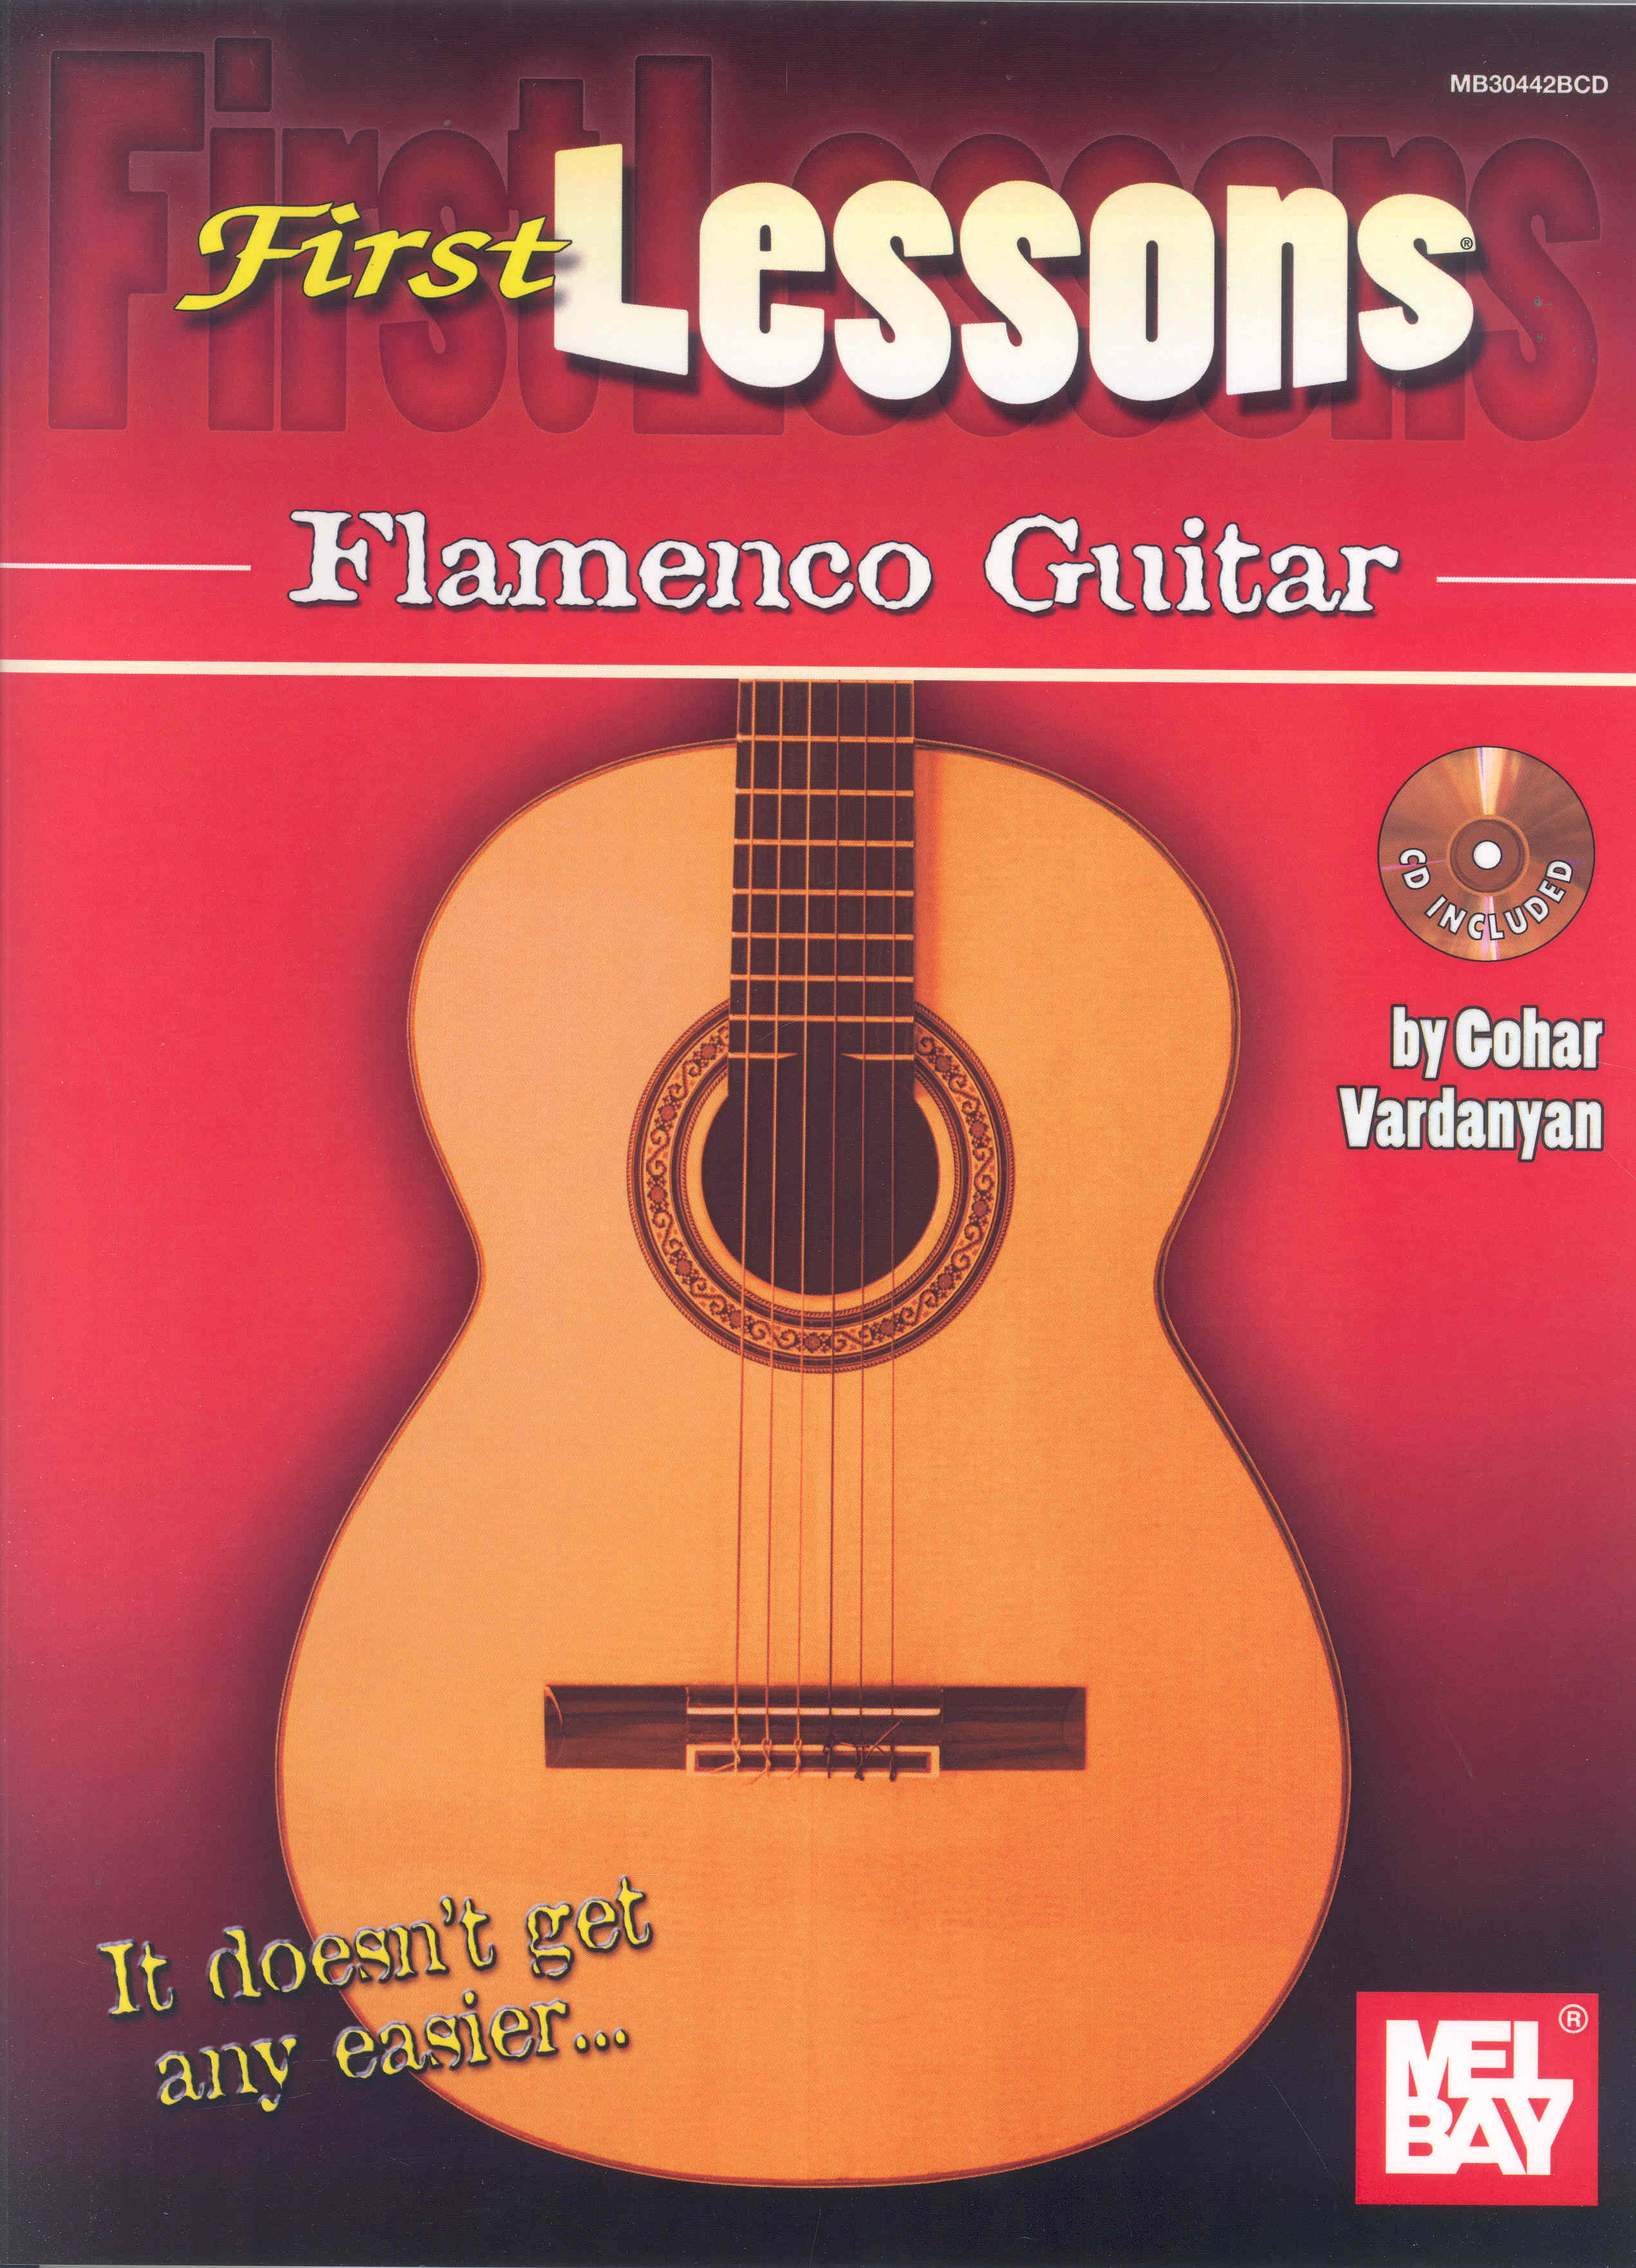 First Lessons Flamenco Guitar Book & Audio Sheet Music Songbook